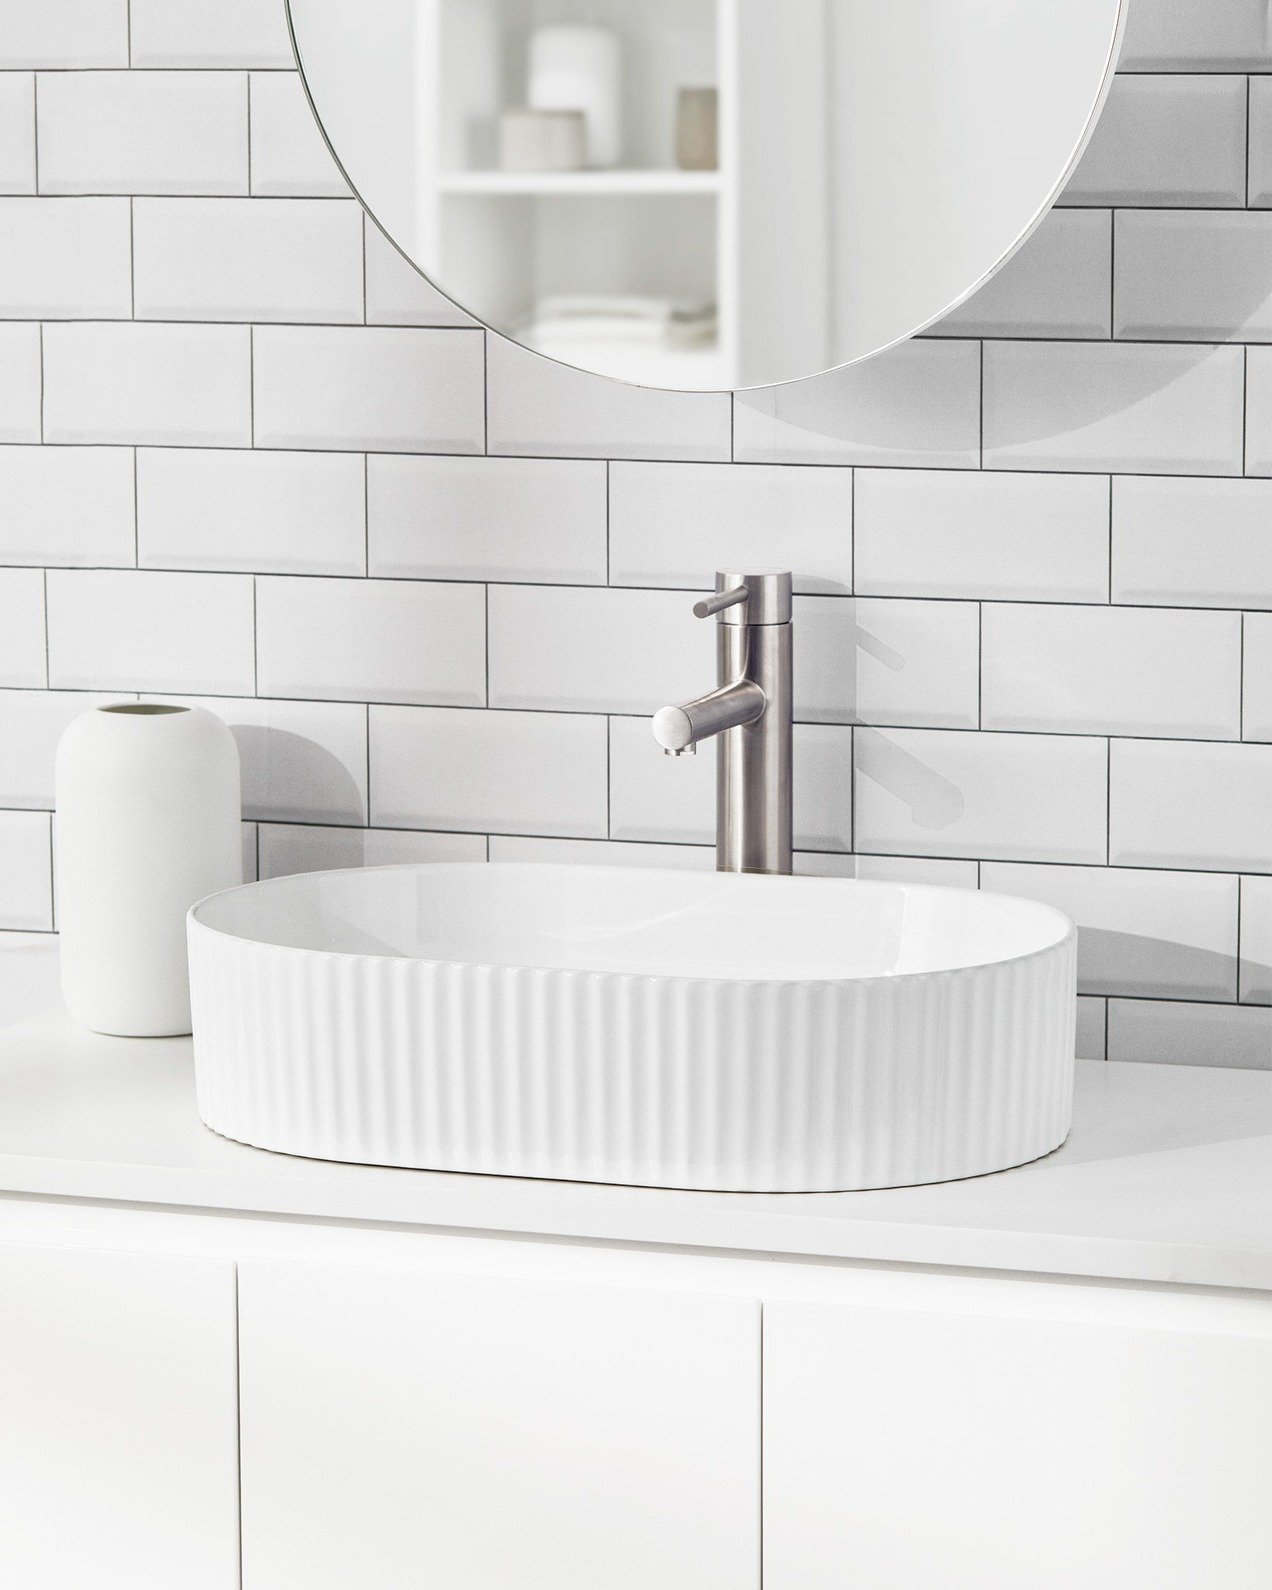 Introducing the new Fluted Oval Basin ✨ A beautiful addition to our Fluted basin range that will breathe new life into your bathroom. 

Available now from @bunnings 

#bathroomreno #bathroomrefresh #bathroombasin #basinsink #bathroomsink